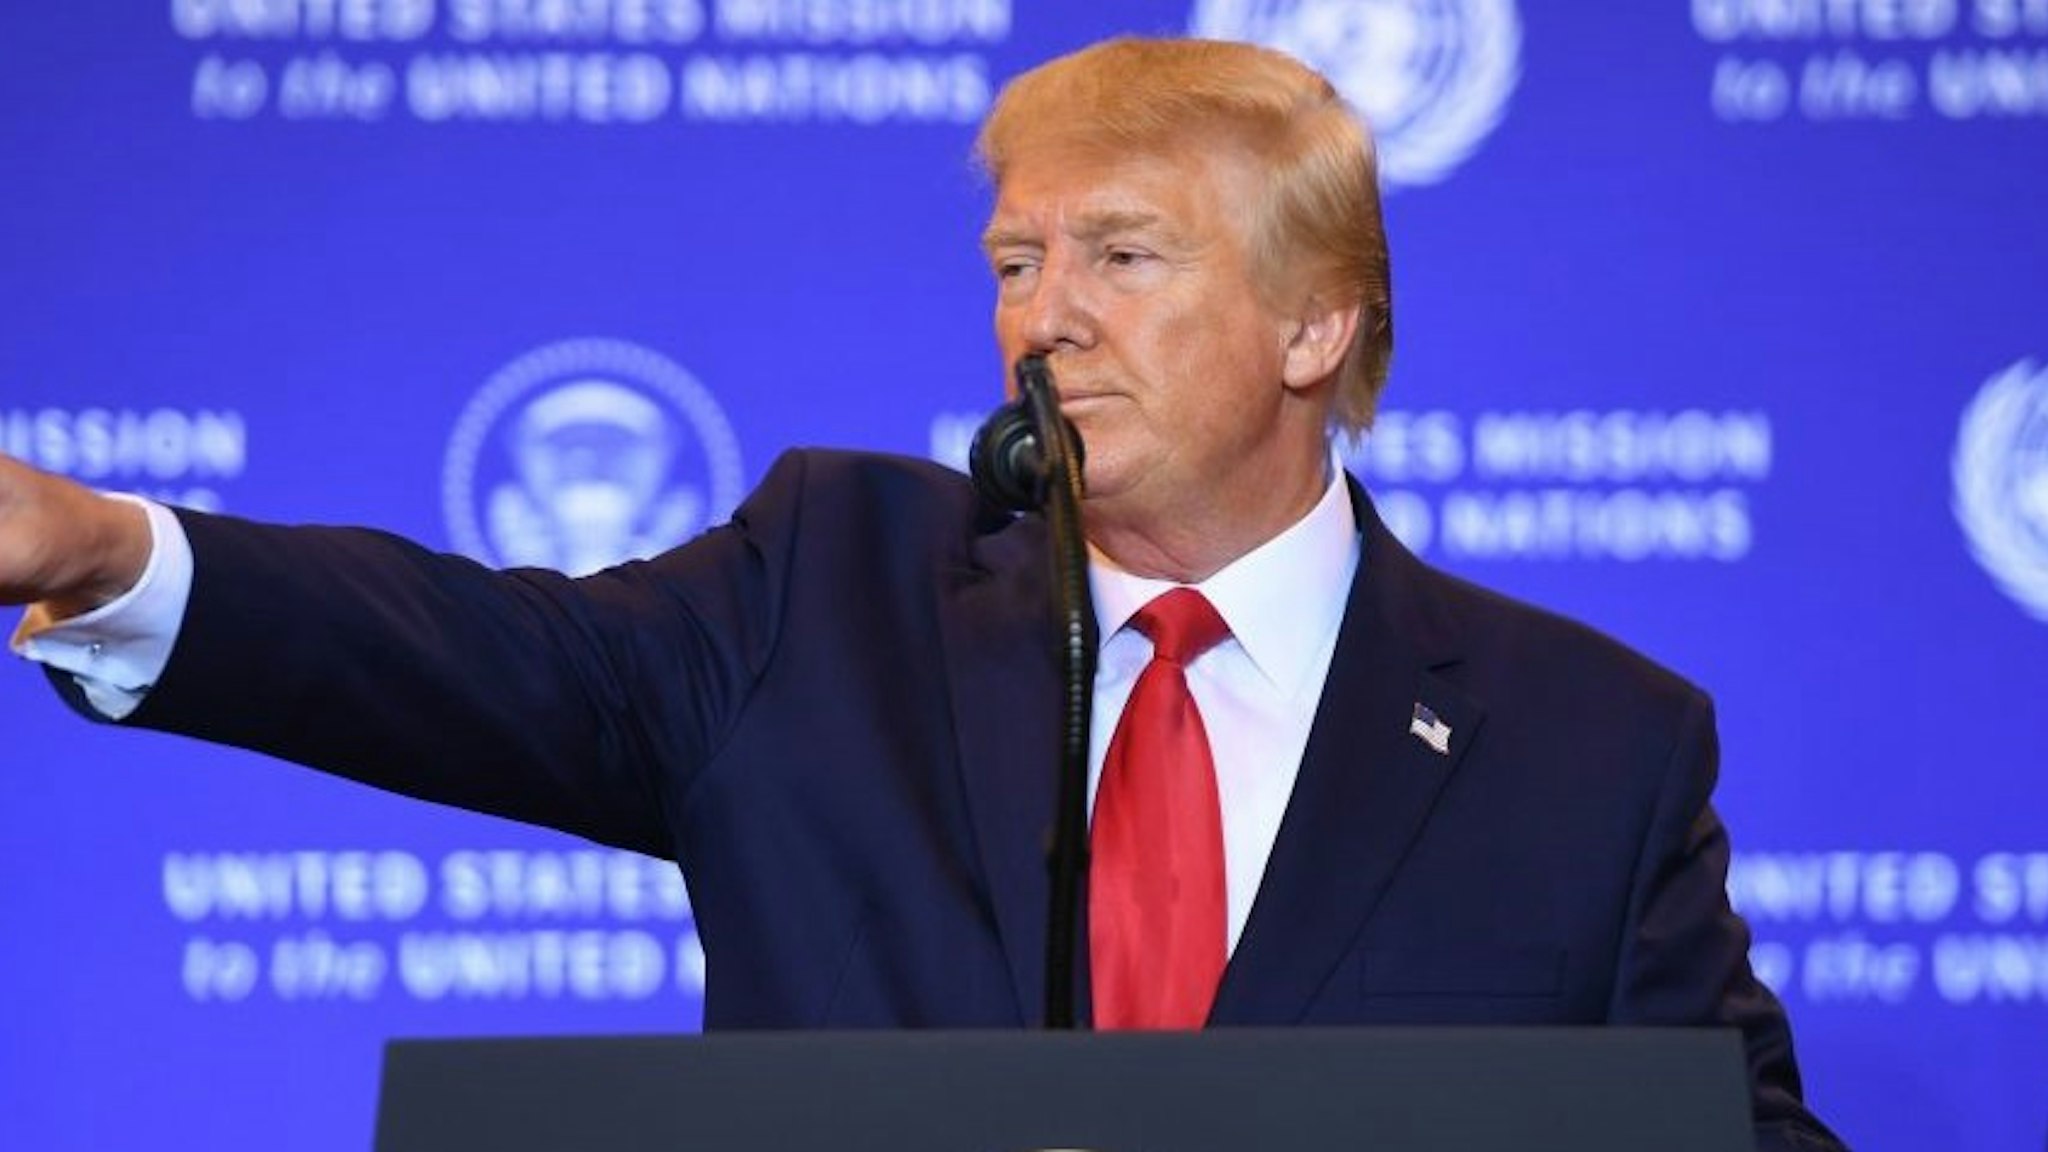 US President Donald Trump takes a question during a press conference in New York, September 25, 2019, on the sidelines of the United Nations General Assembly. - Trump said Wednesday he encouraged India and Pakistan to work out their differences in separate meetings with their prime ministers this week. "I said, 'Fellas, work it out. Just work it out,'" Trump told a news conference after attending the UN General Assembly. (Photo by SAUL LOEB / AFP) (Photo by